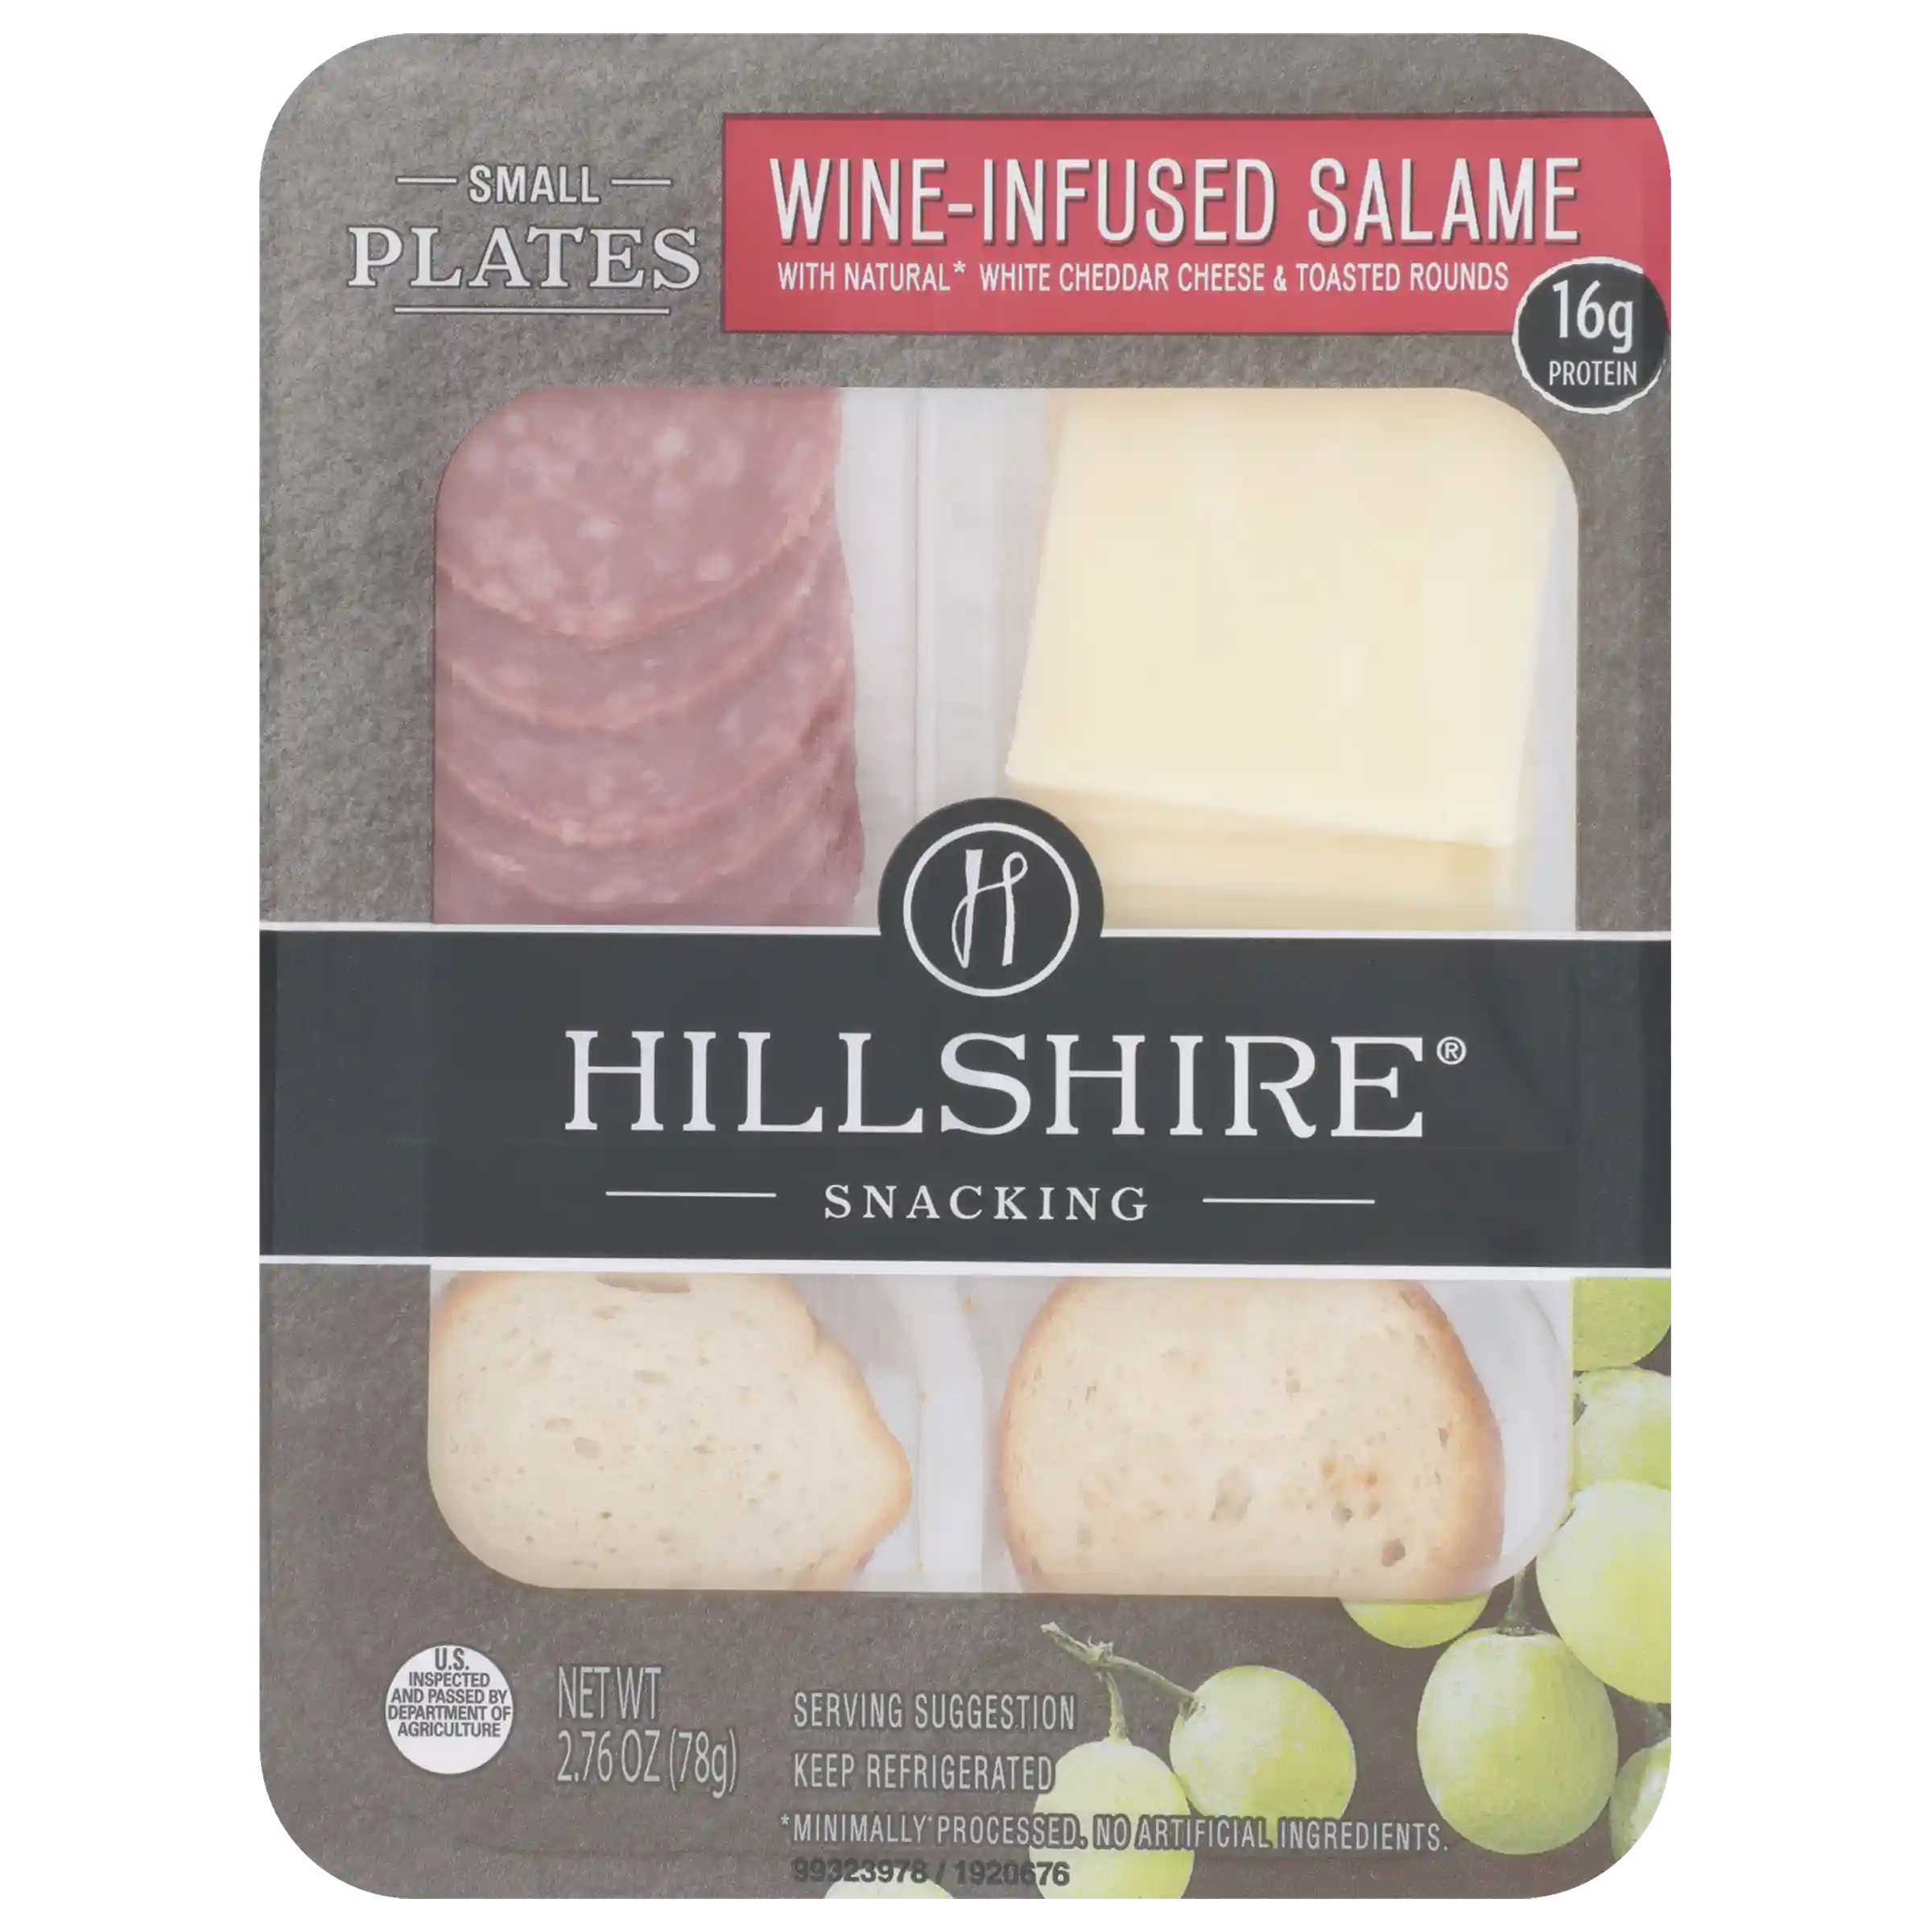 Hillshire® Snacking Small Plates, Wine-Infused Salame with White Cheddar Cheese, 2.76 oz._image_11